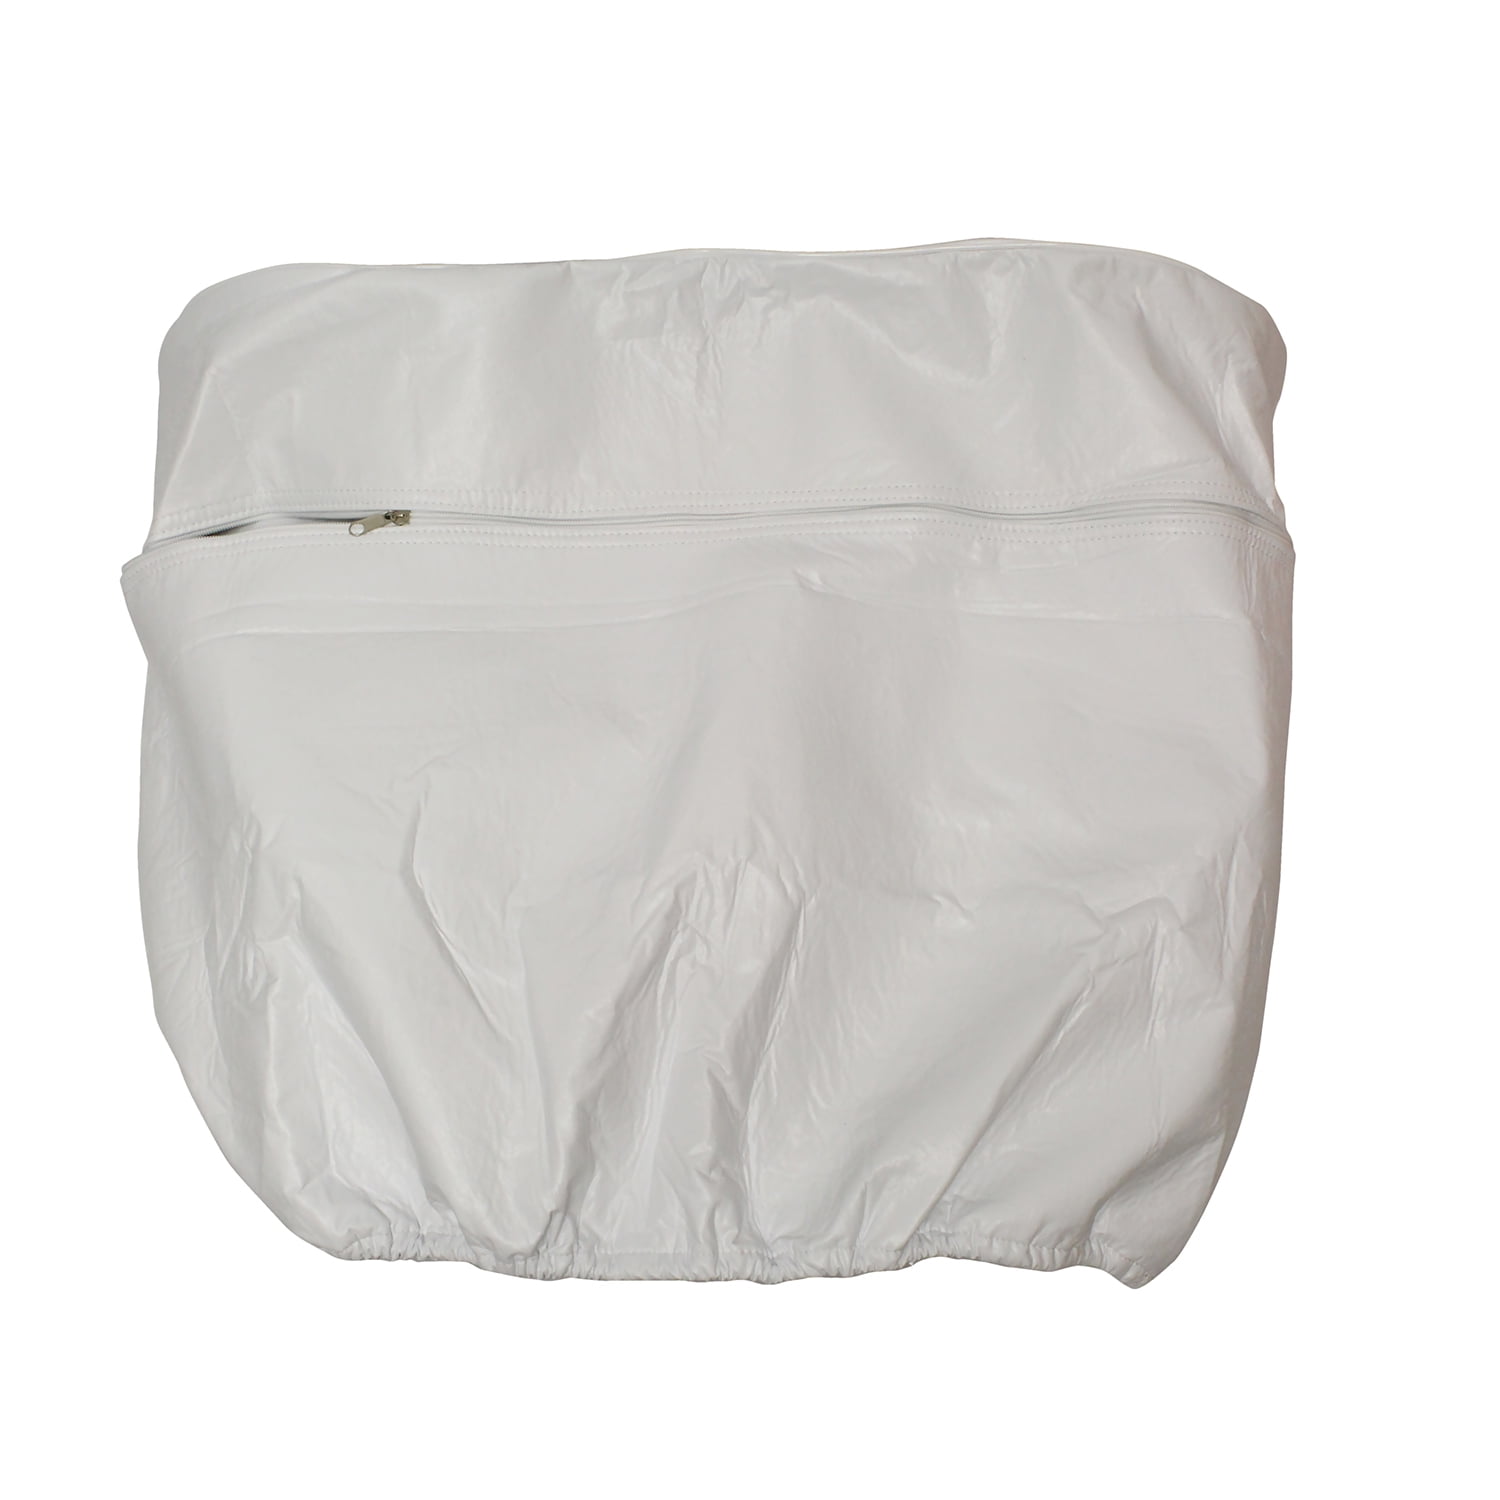 dumble camper propane tank cover double 30 lb propane tank cover for ...